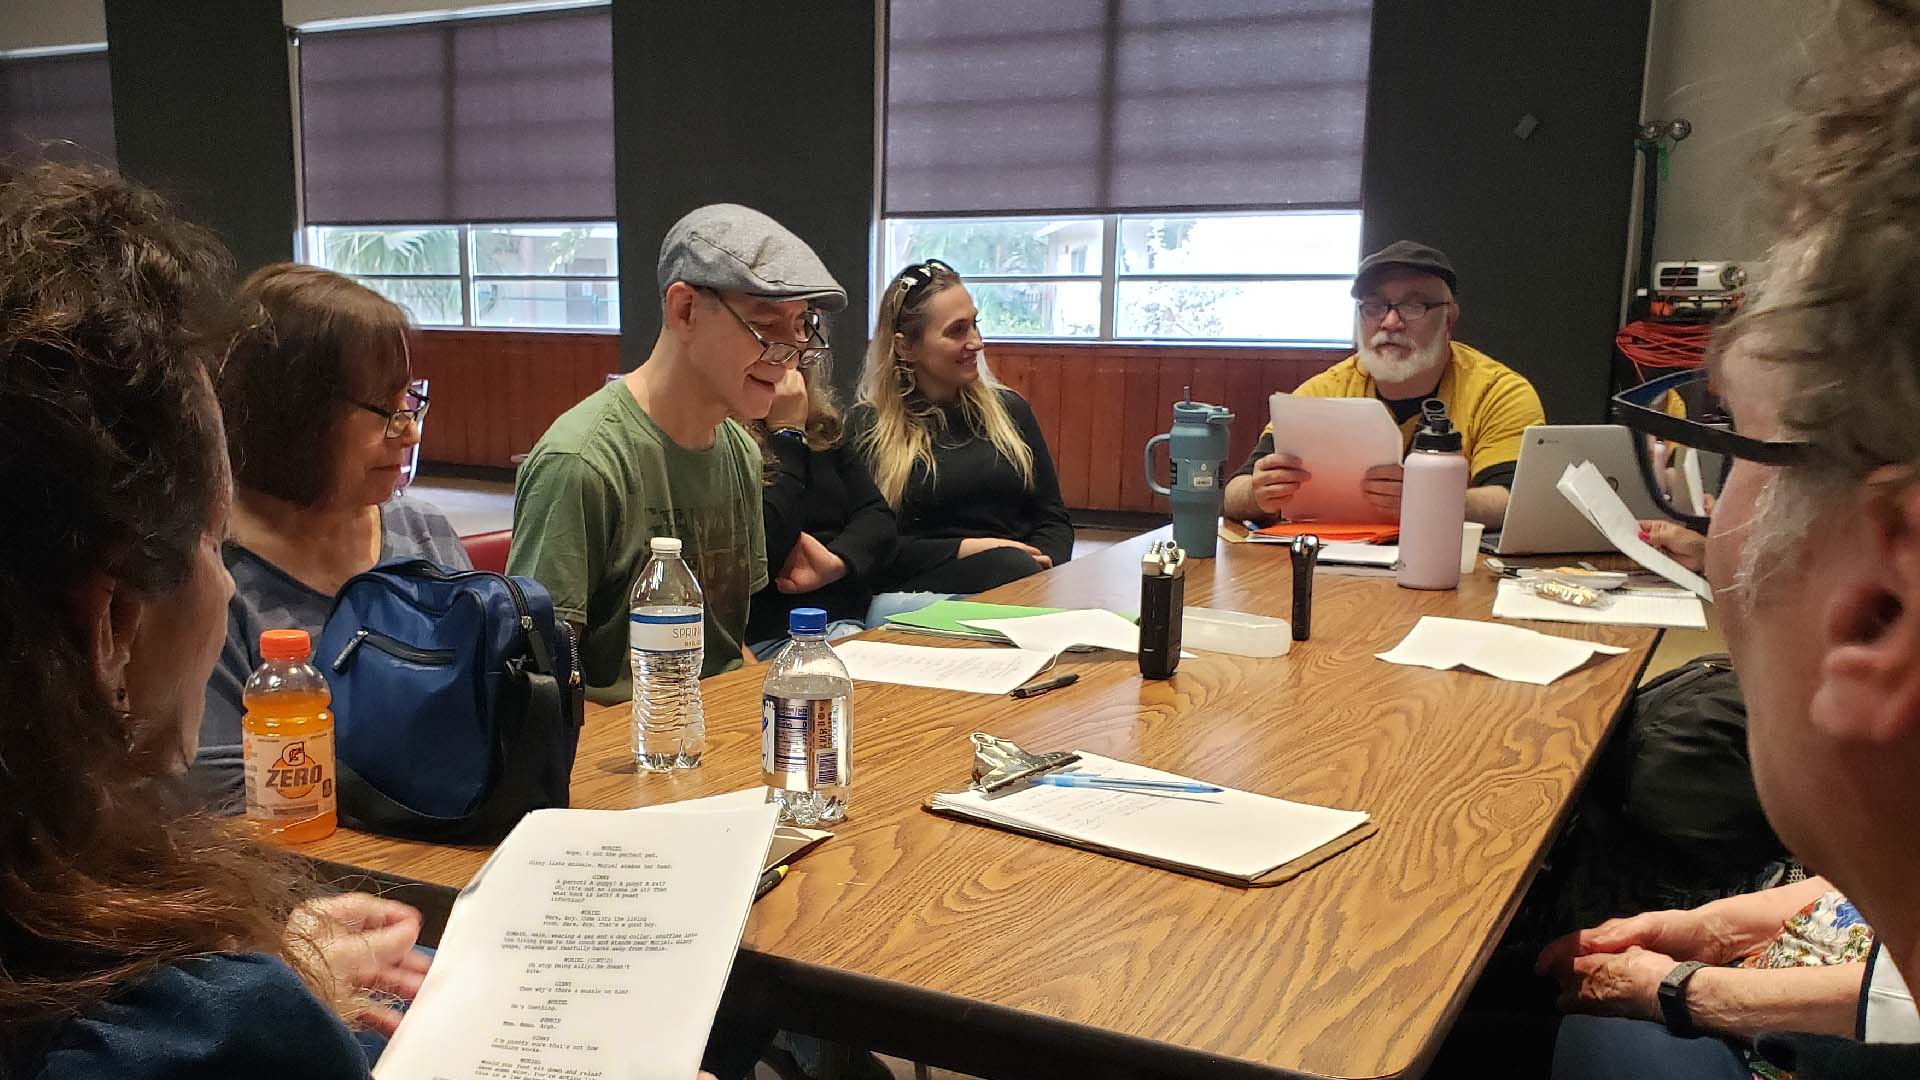 Group of actors reading scripts at a table.